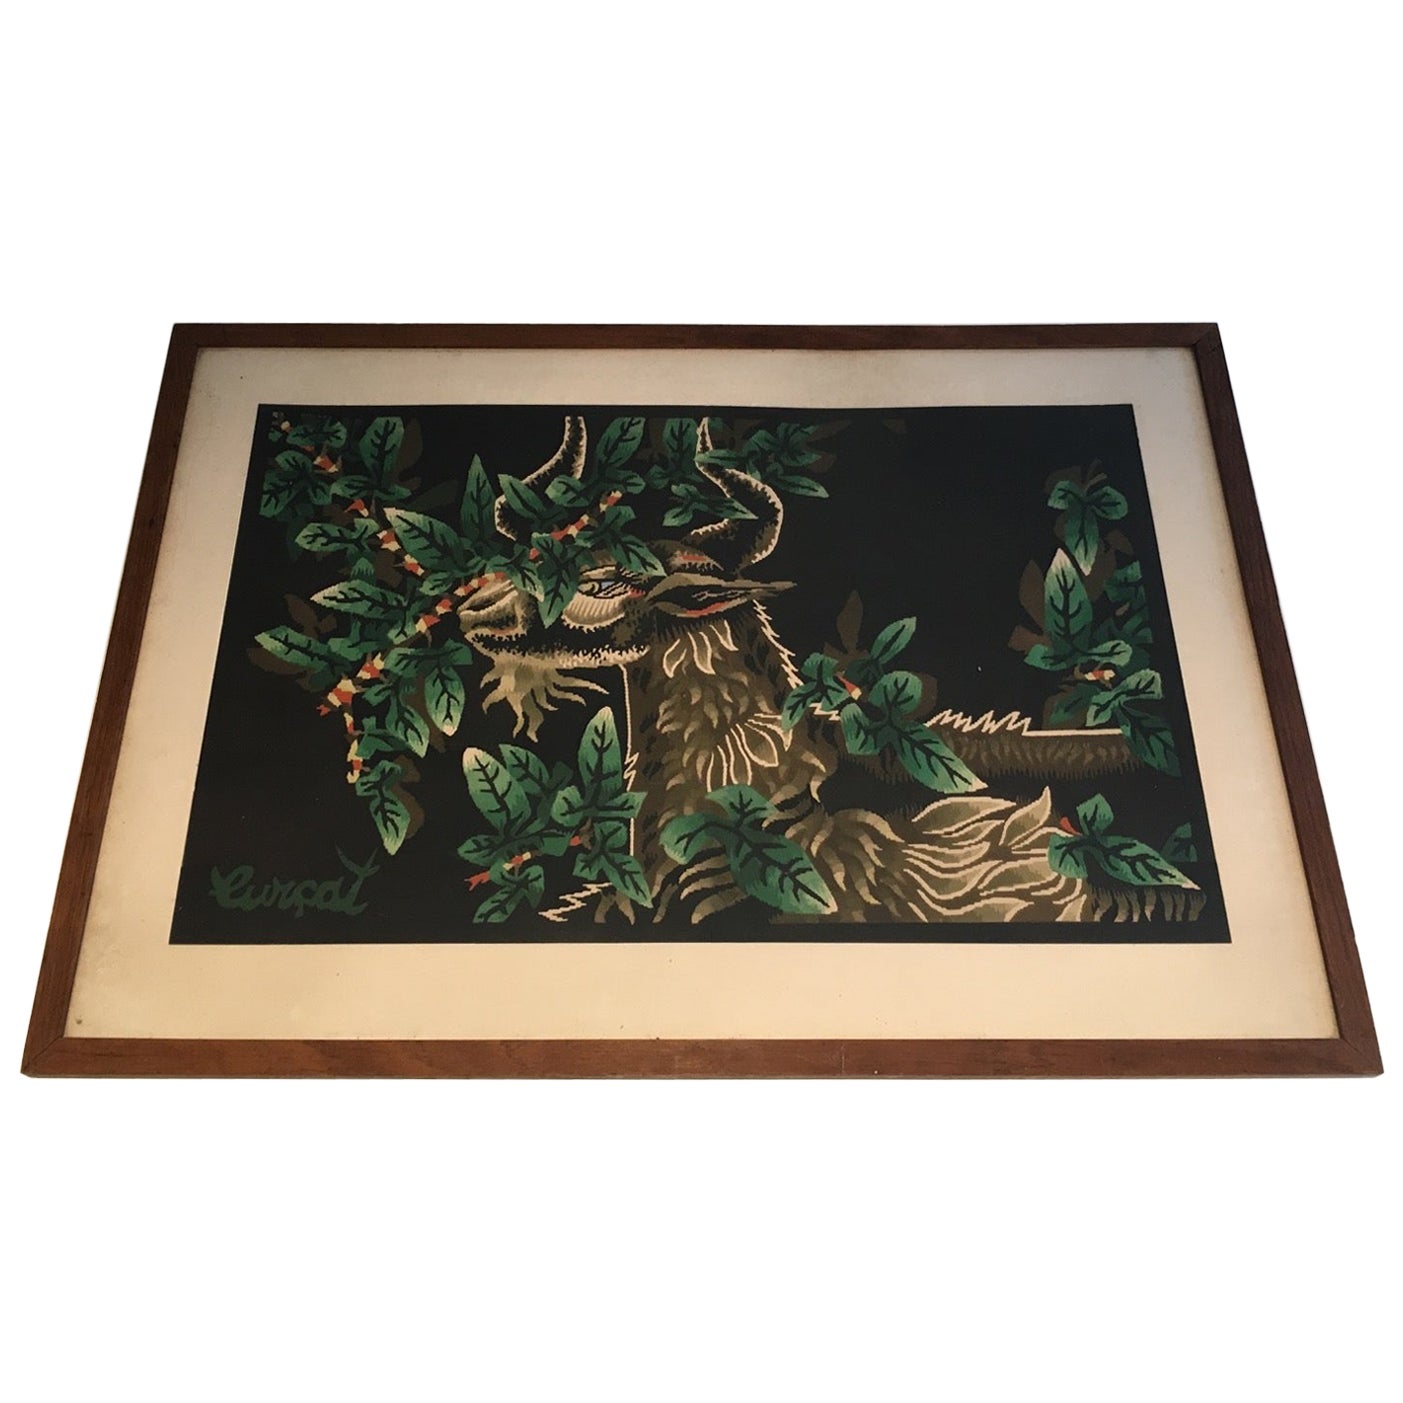 Ram Printing, French Work Signed by Jean Lurçat, Circa 1970 For Sale